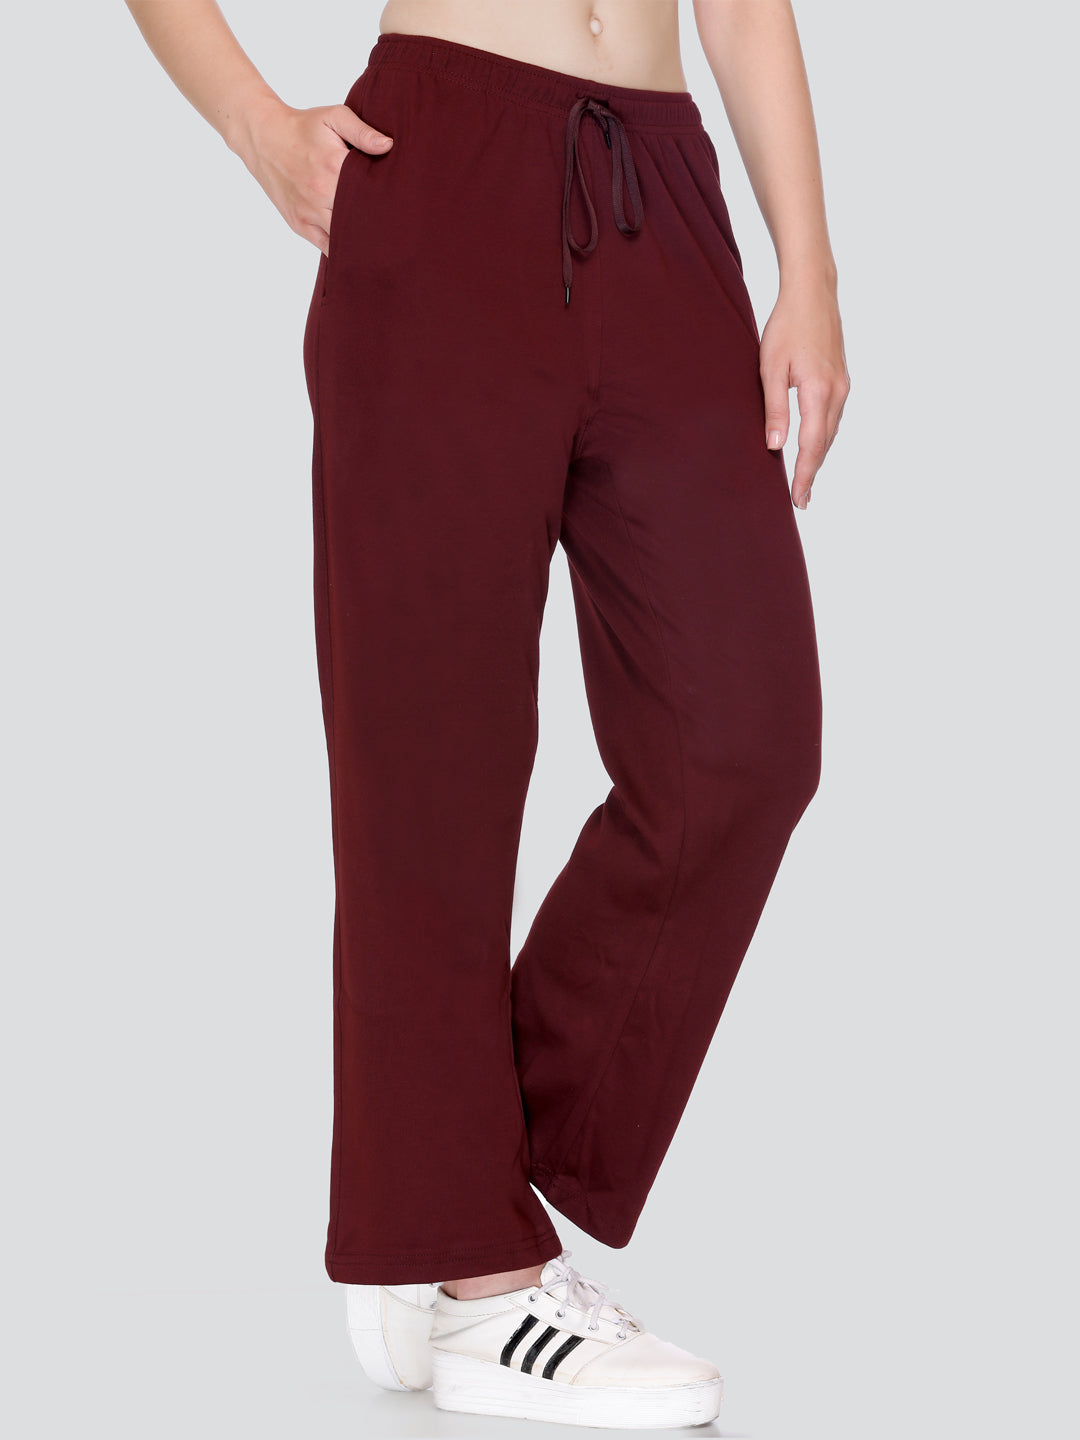 Comfortable High Waist Cotton Flared Pants For Women in Wine online at best prices